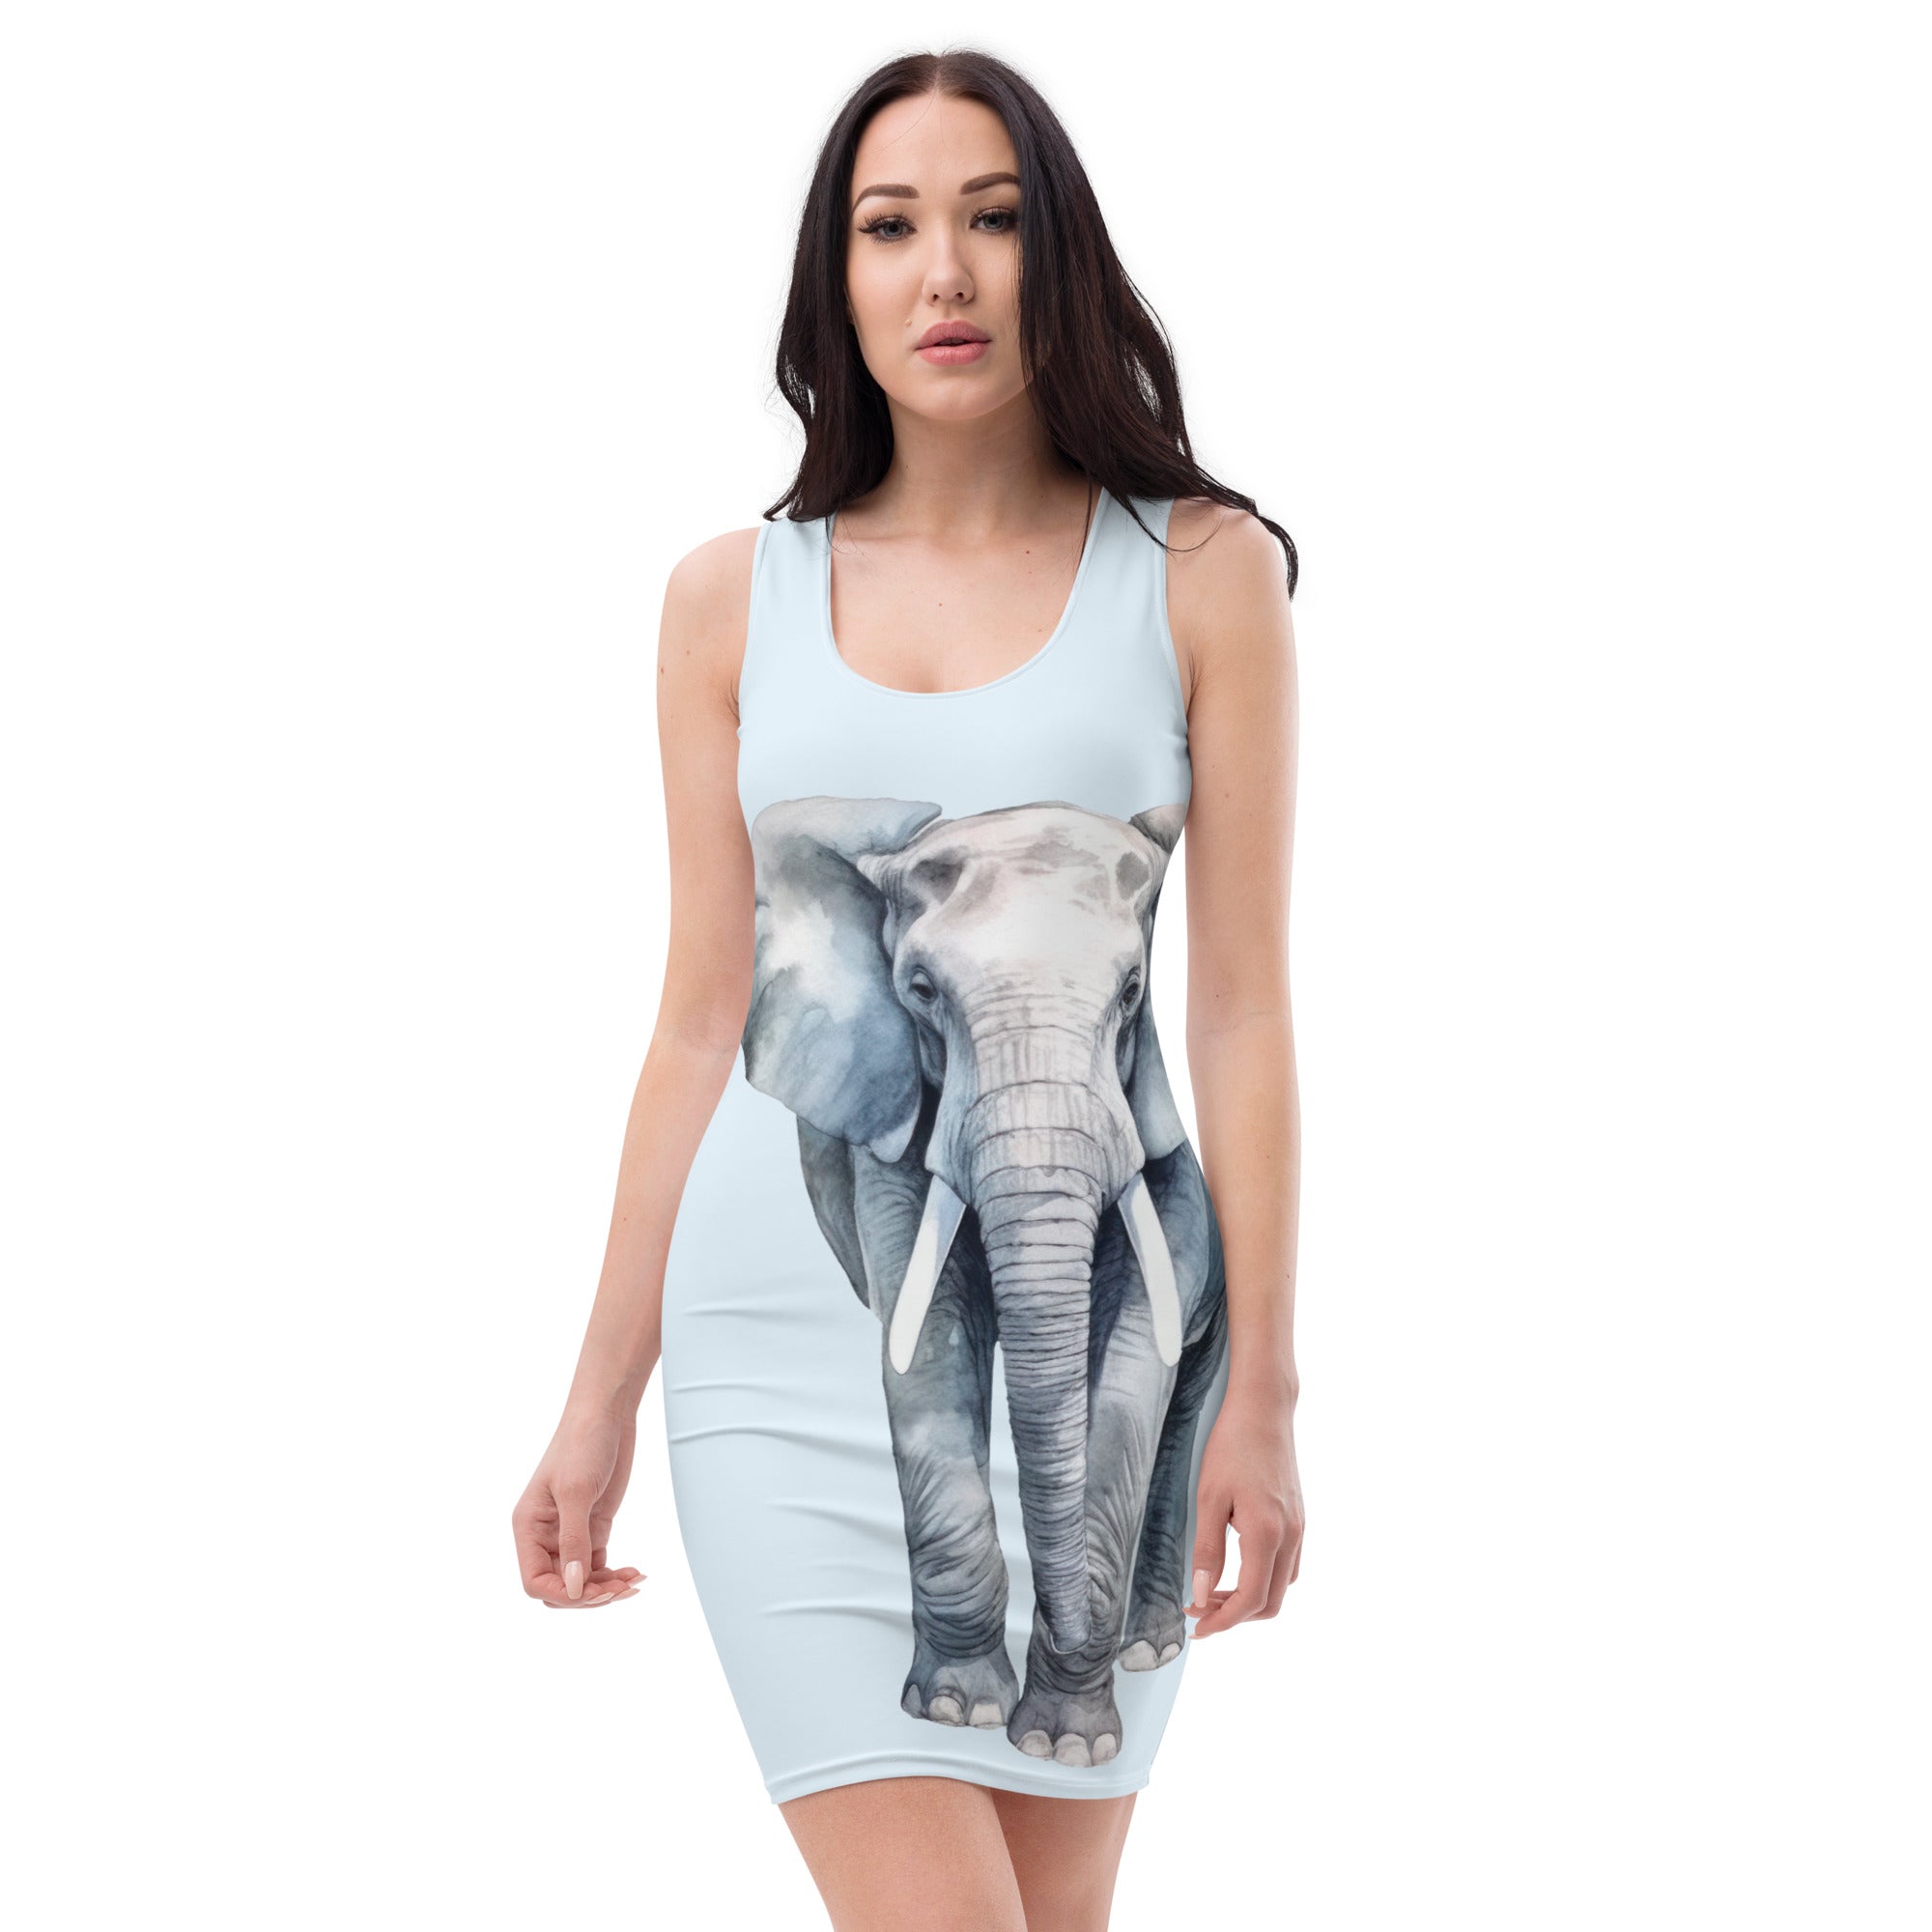 "Enchanting Elephants: Fitted Dress for Elephant Lovers", lioness-love